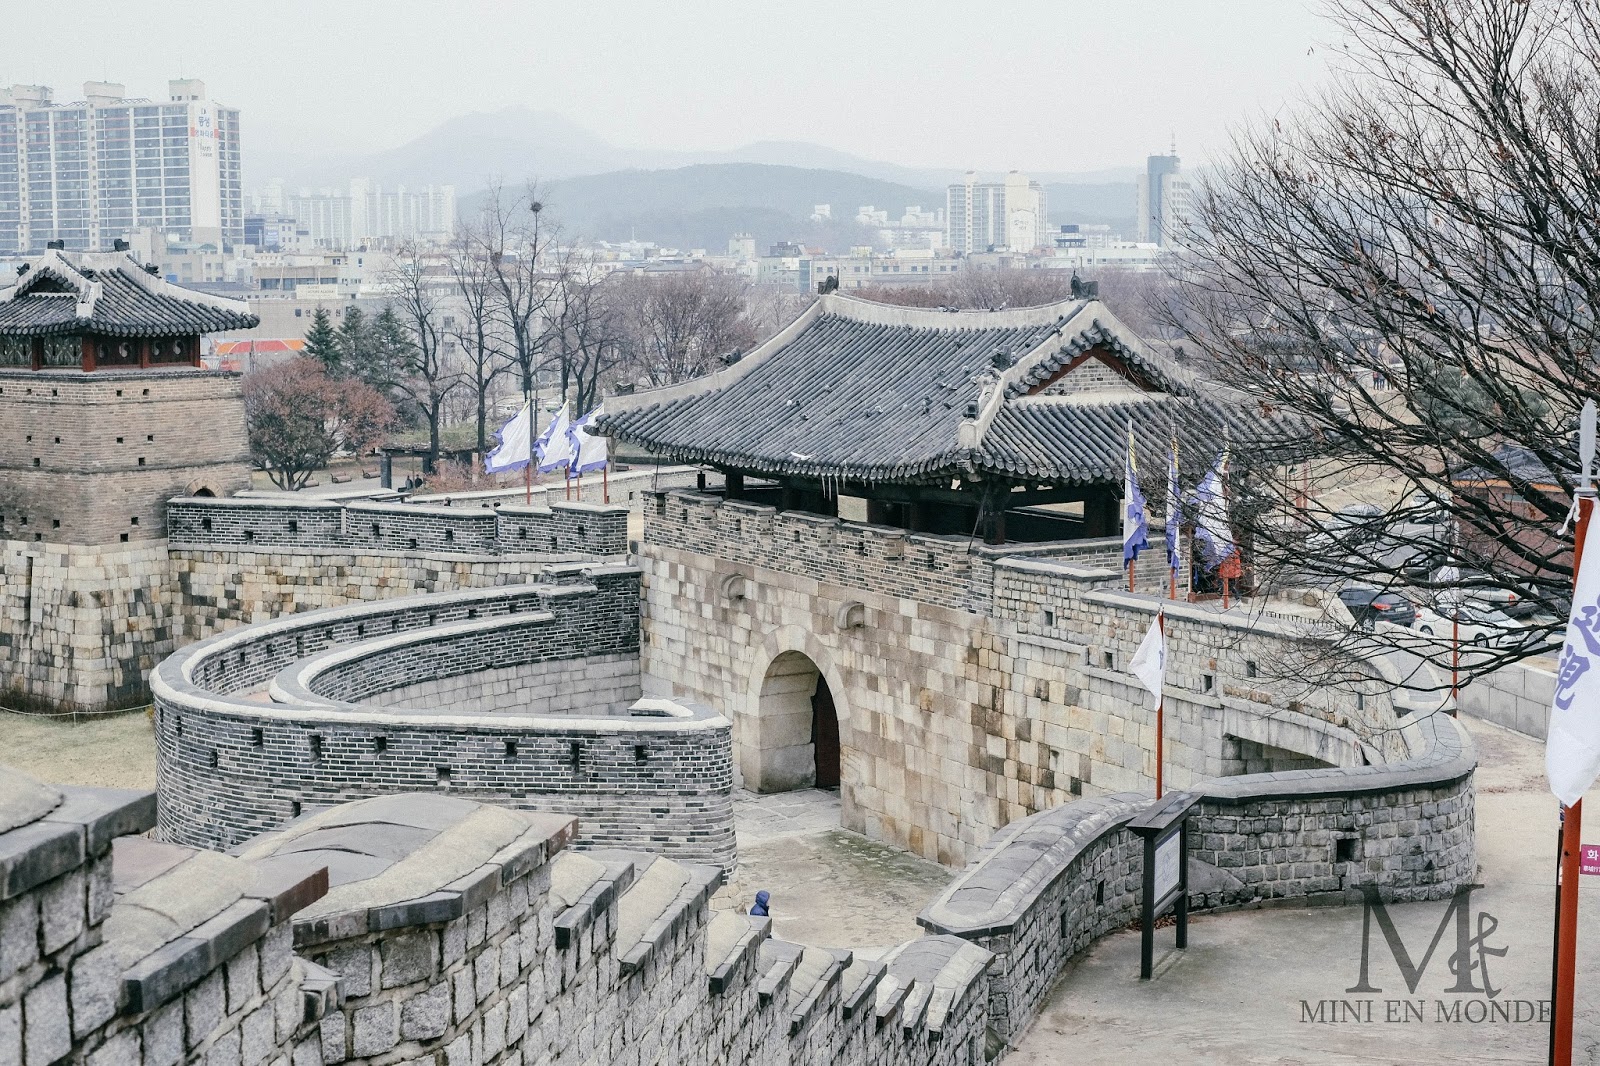  Suwon  Hwaseong Fortress   An Unesco Heritage Sites 